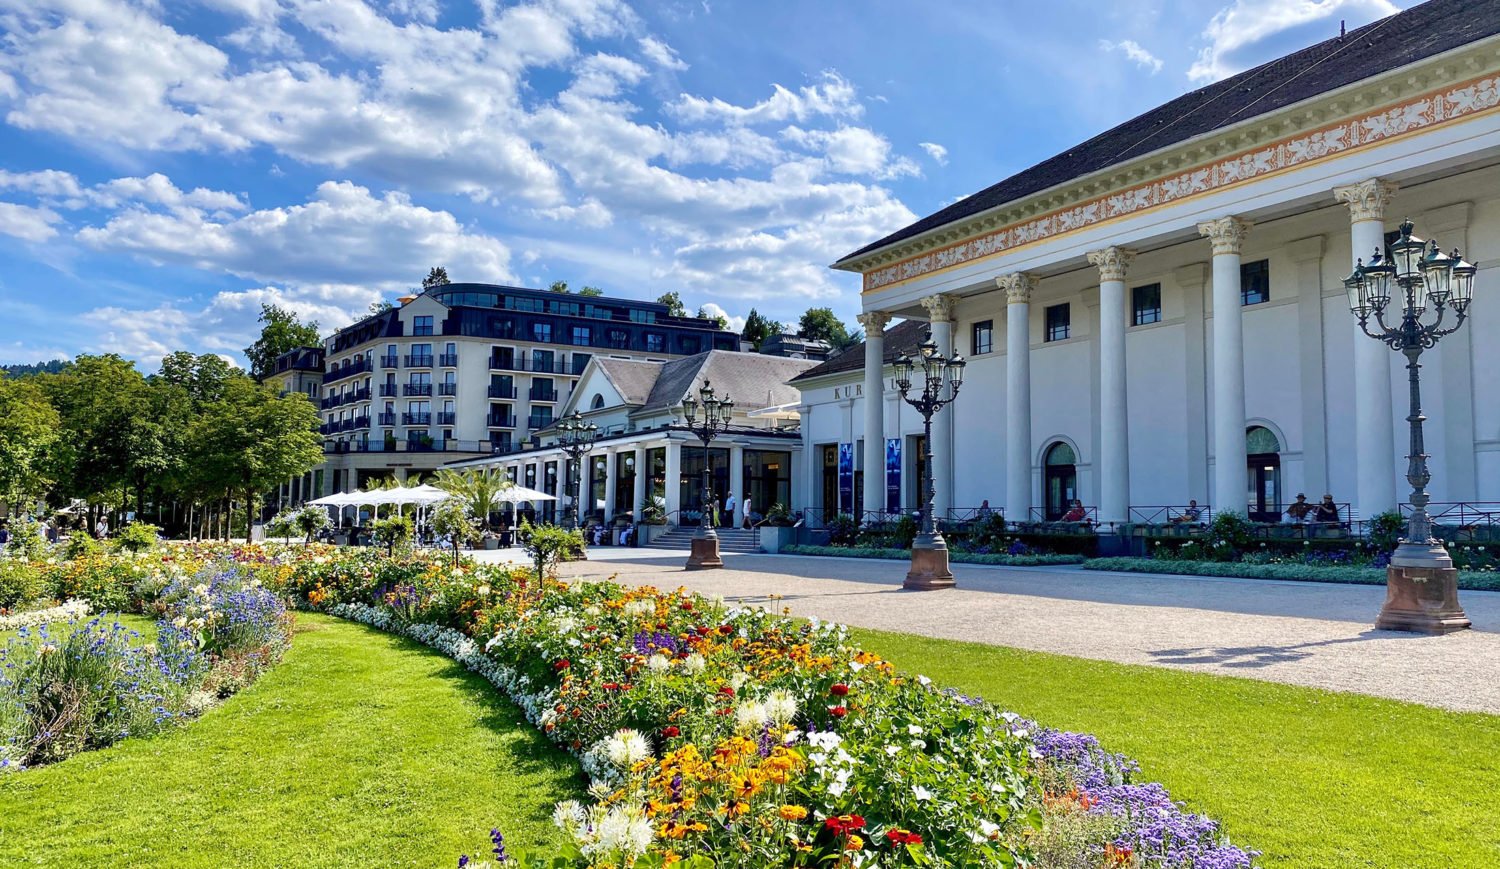 Architectural synthesis of the arts and center of the city - the Kurhaus of Baden-Baden